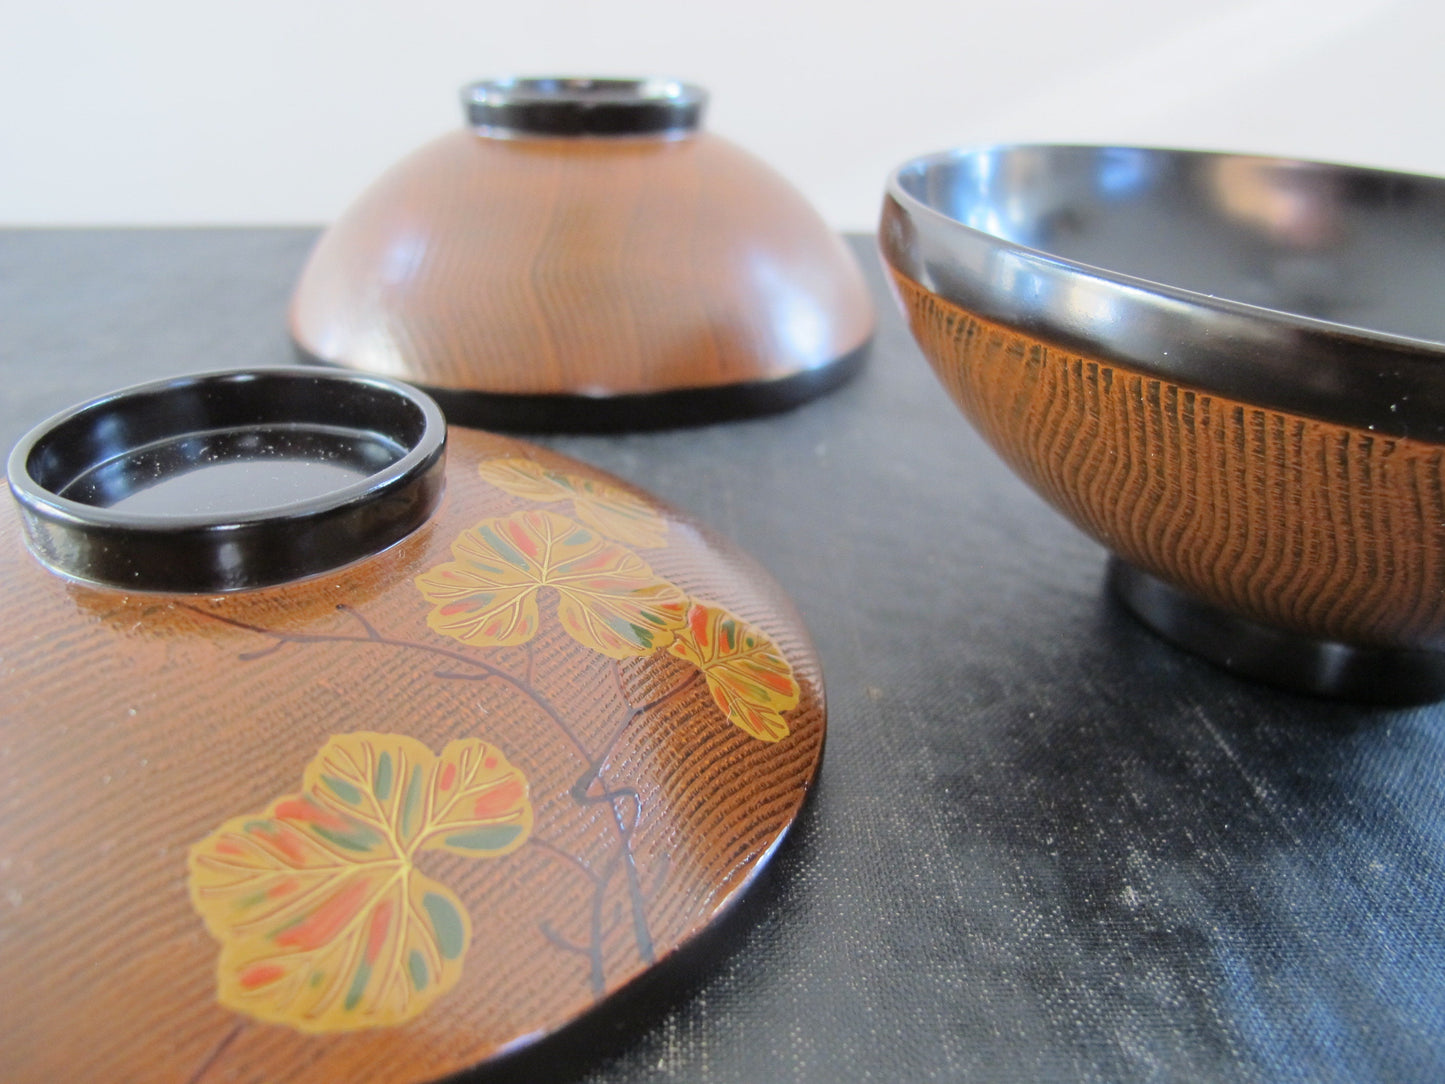 Japanese Lacquer Covered Bowls Pair Midcentury c. 1960 Faux Bois Black Gold Orange Green Autumnal Fall Grape Leaves Lids as Bowls